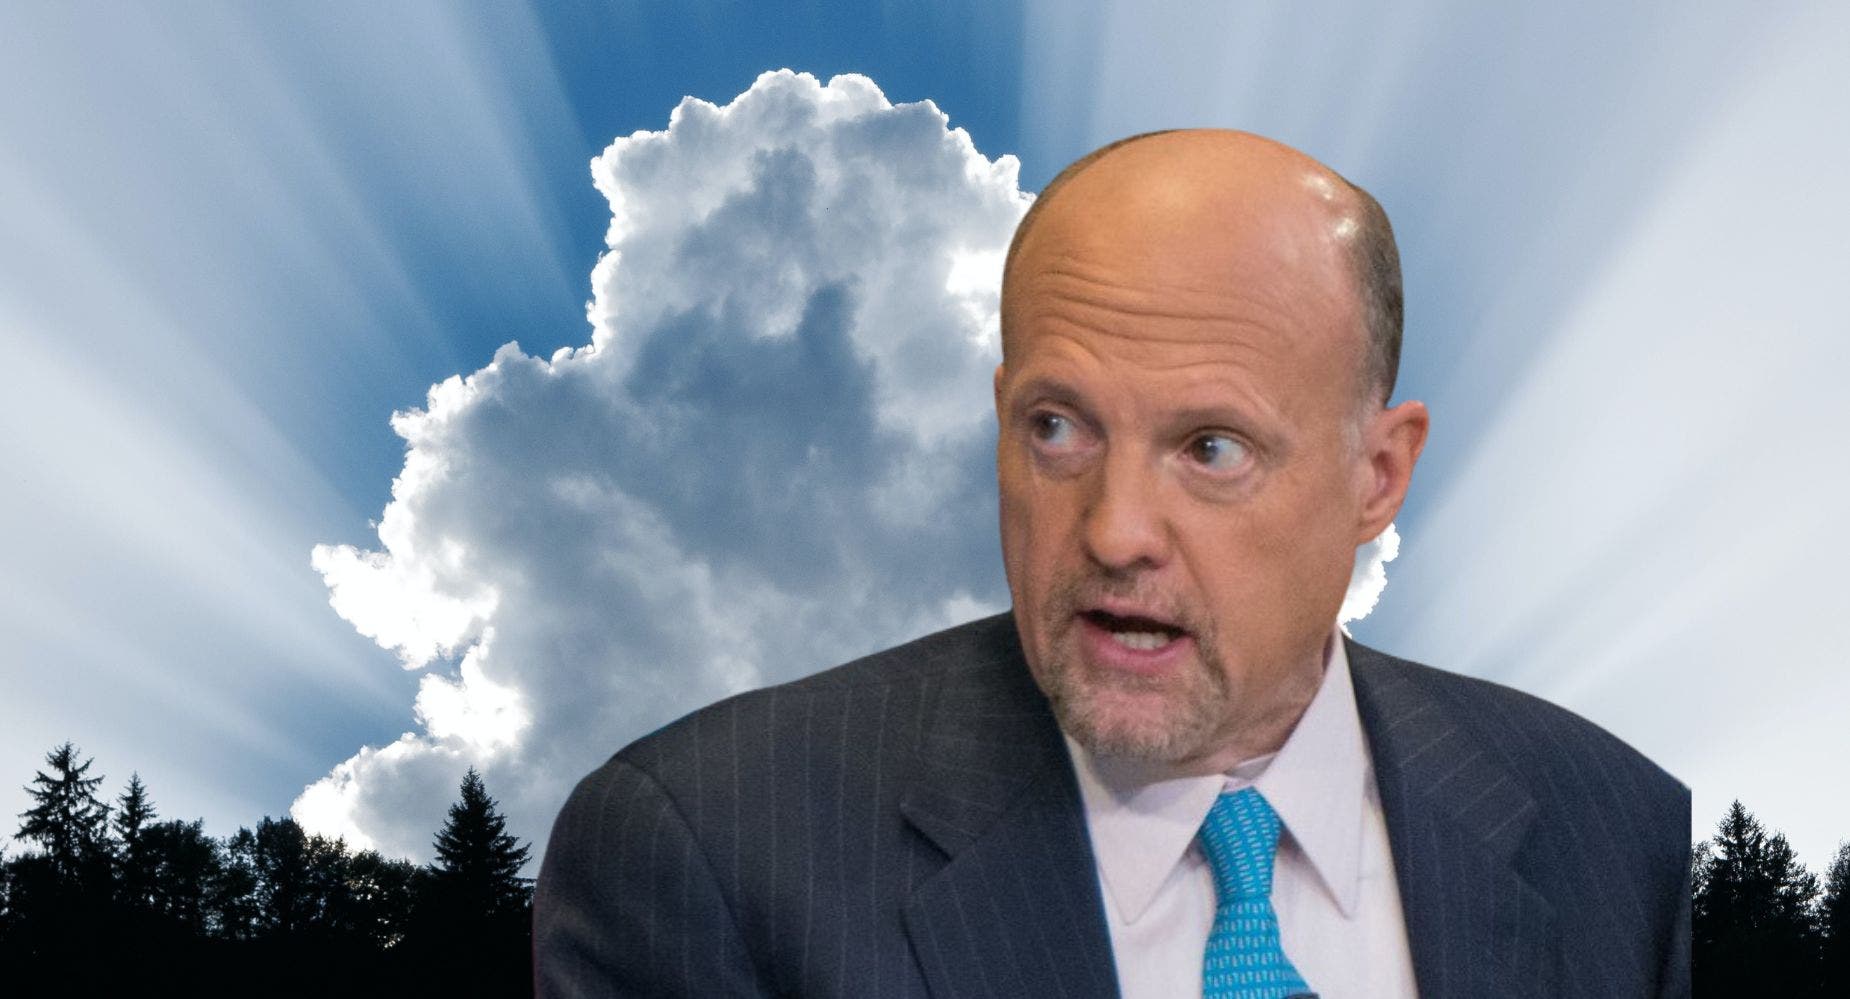 Jim Cramer Says Get Out Of Cloud Sector On This Rally, But These 3 Stocks Are Worth Keeping